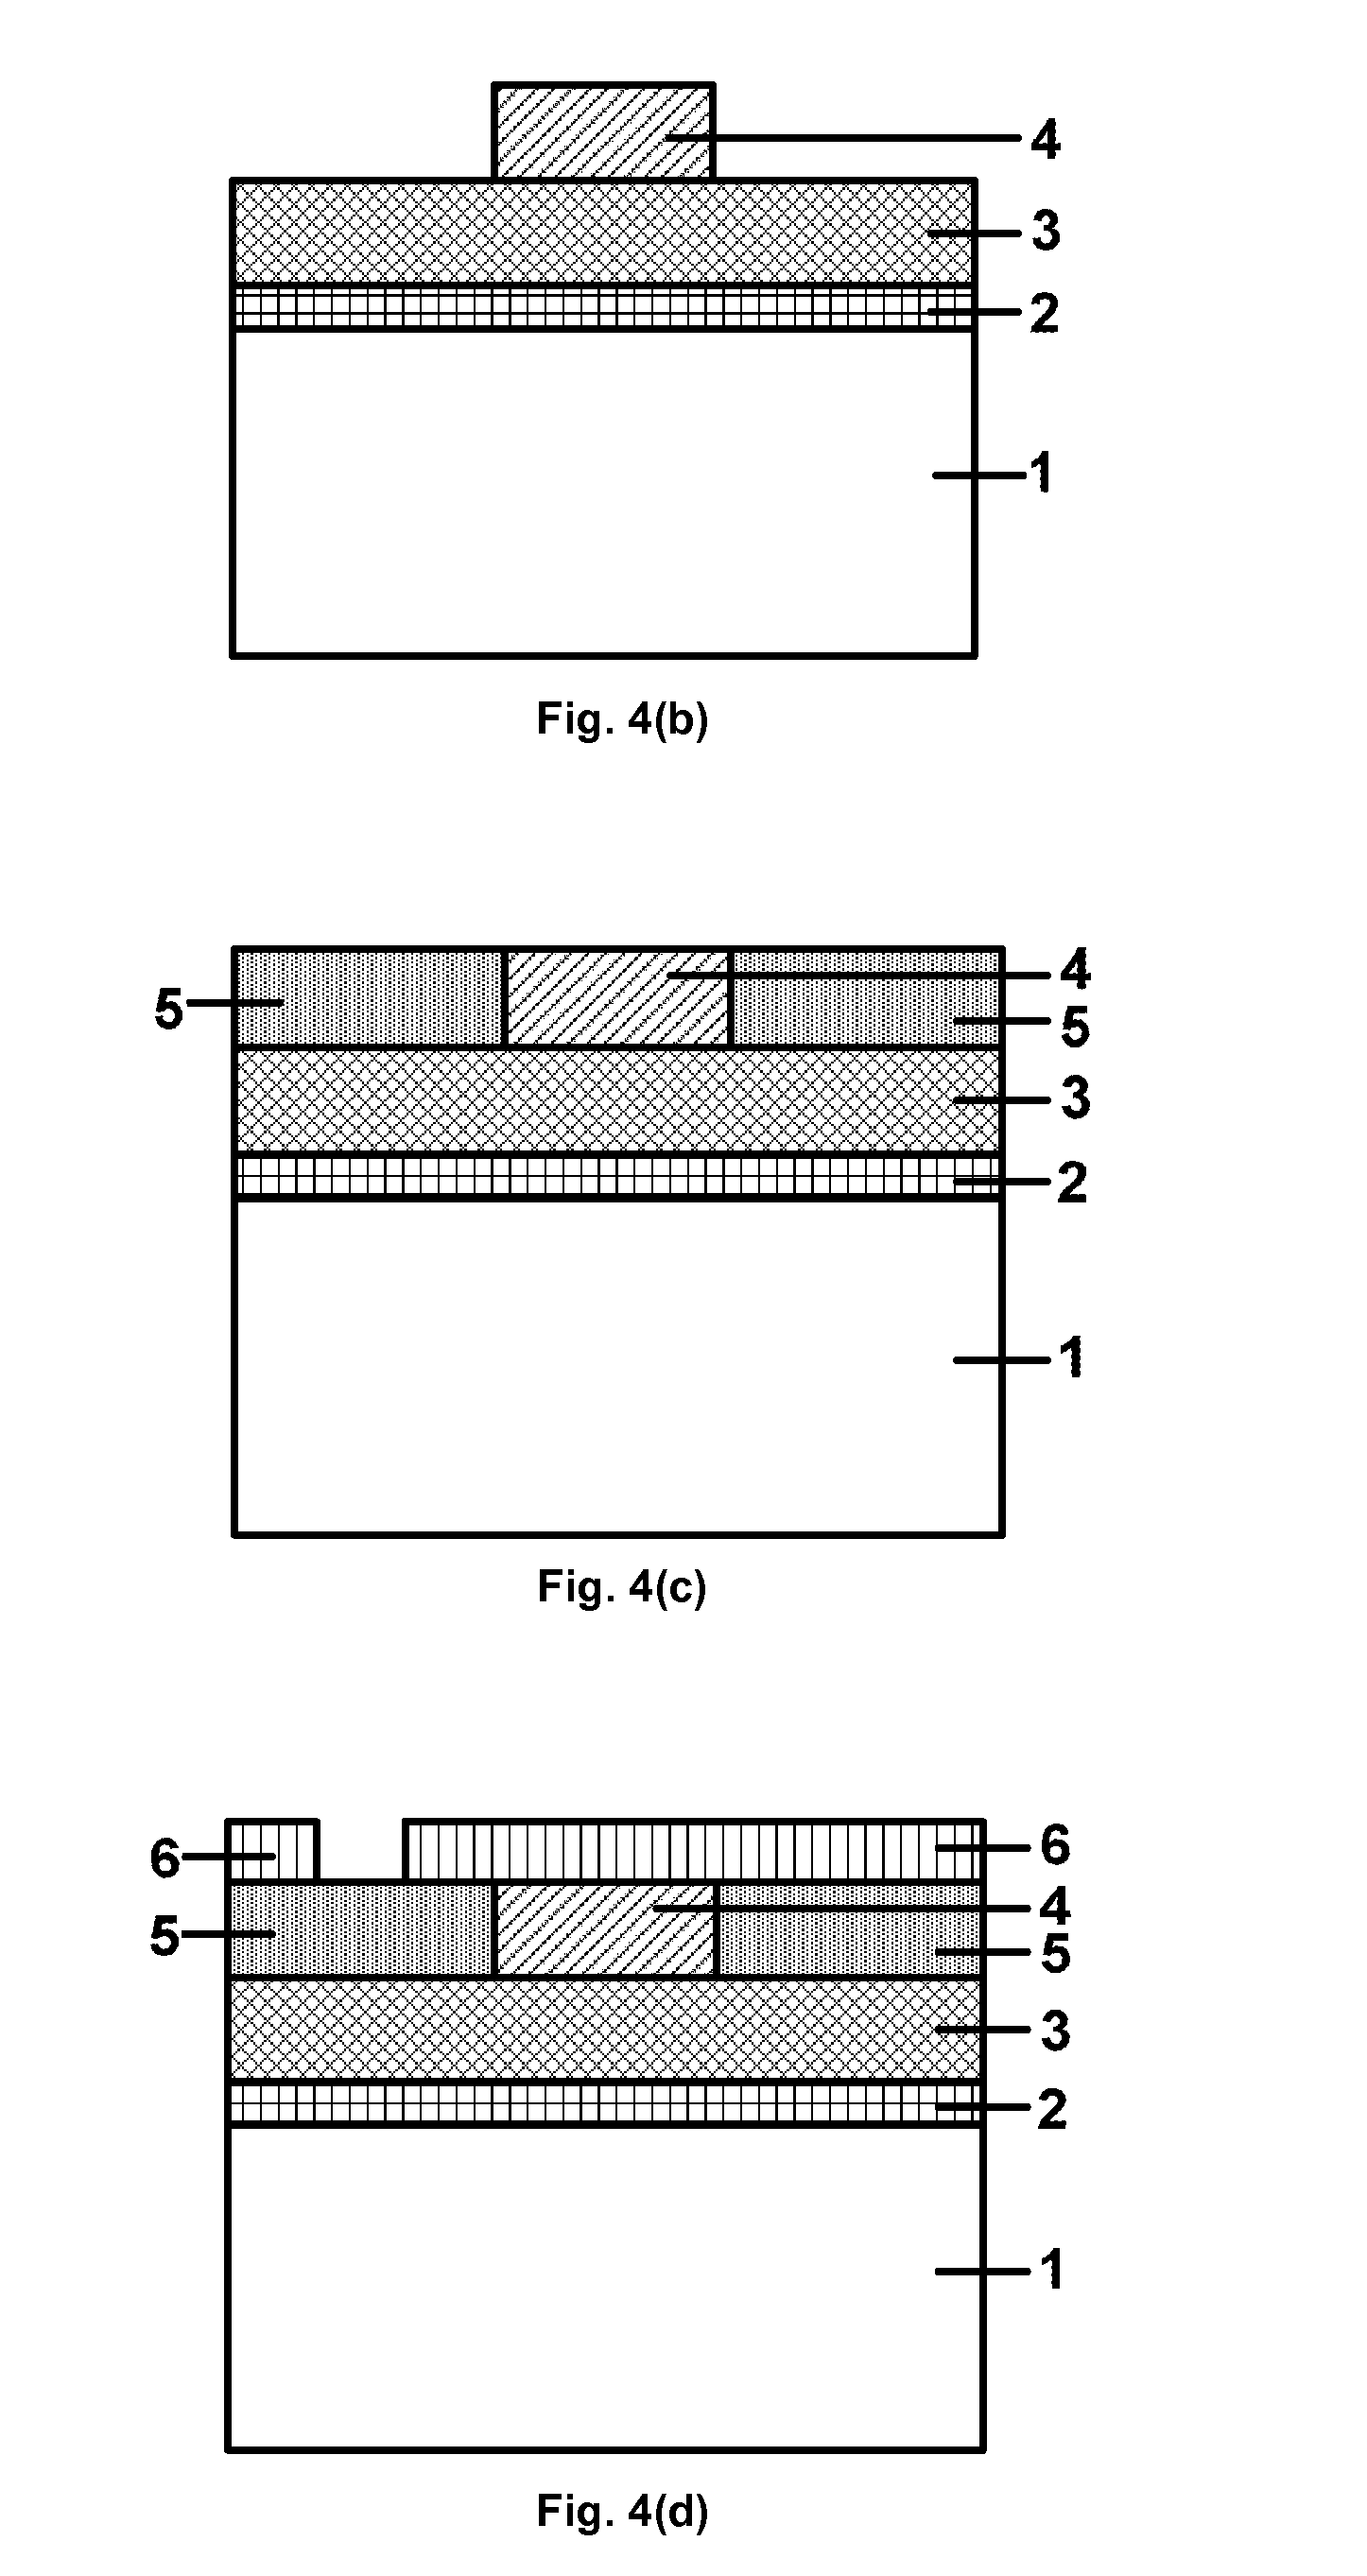 Method for fabricating a tunneling field-effect transistor